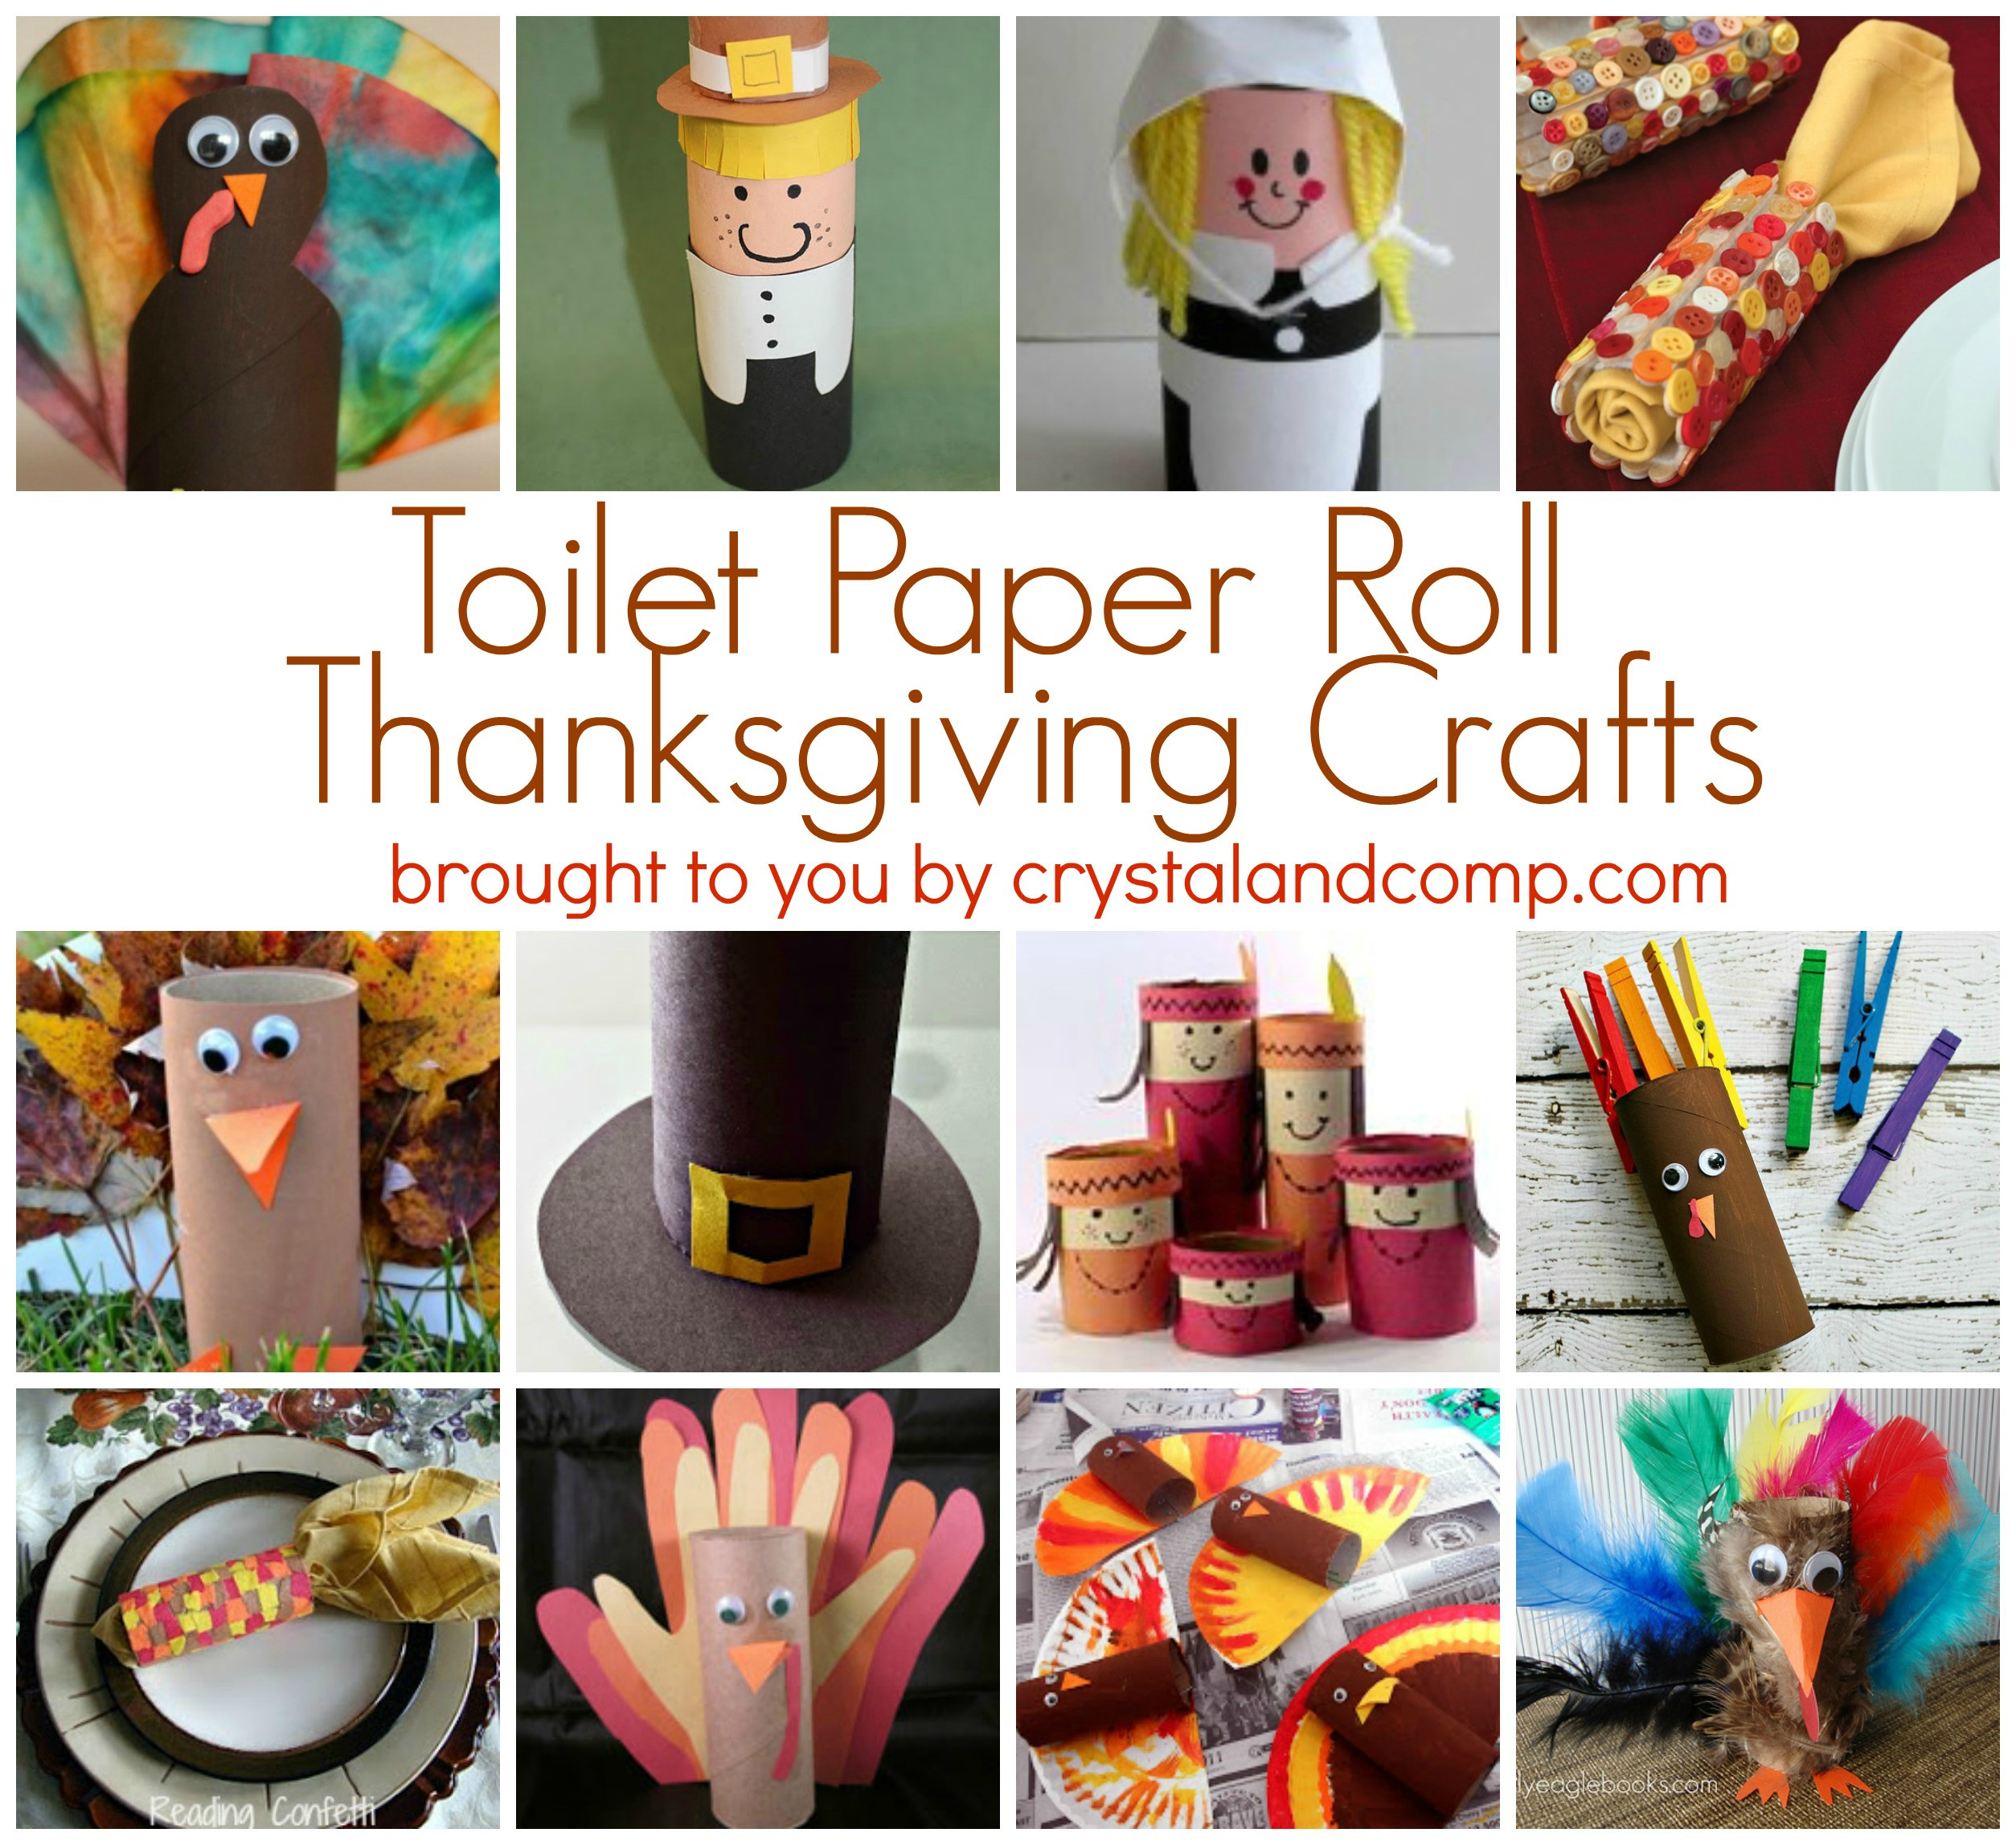 Toilet Paper Roll Thanksgiving Crafts
 Toilet Paper Roll Thanksgiving Crafts